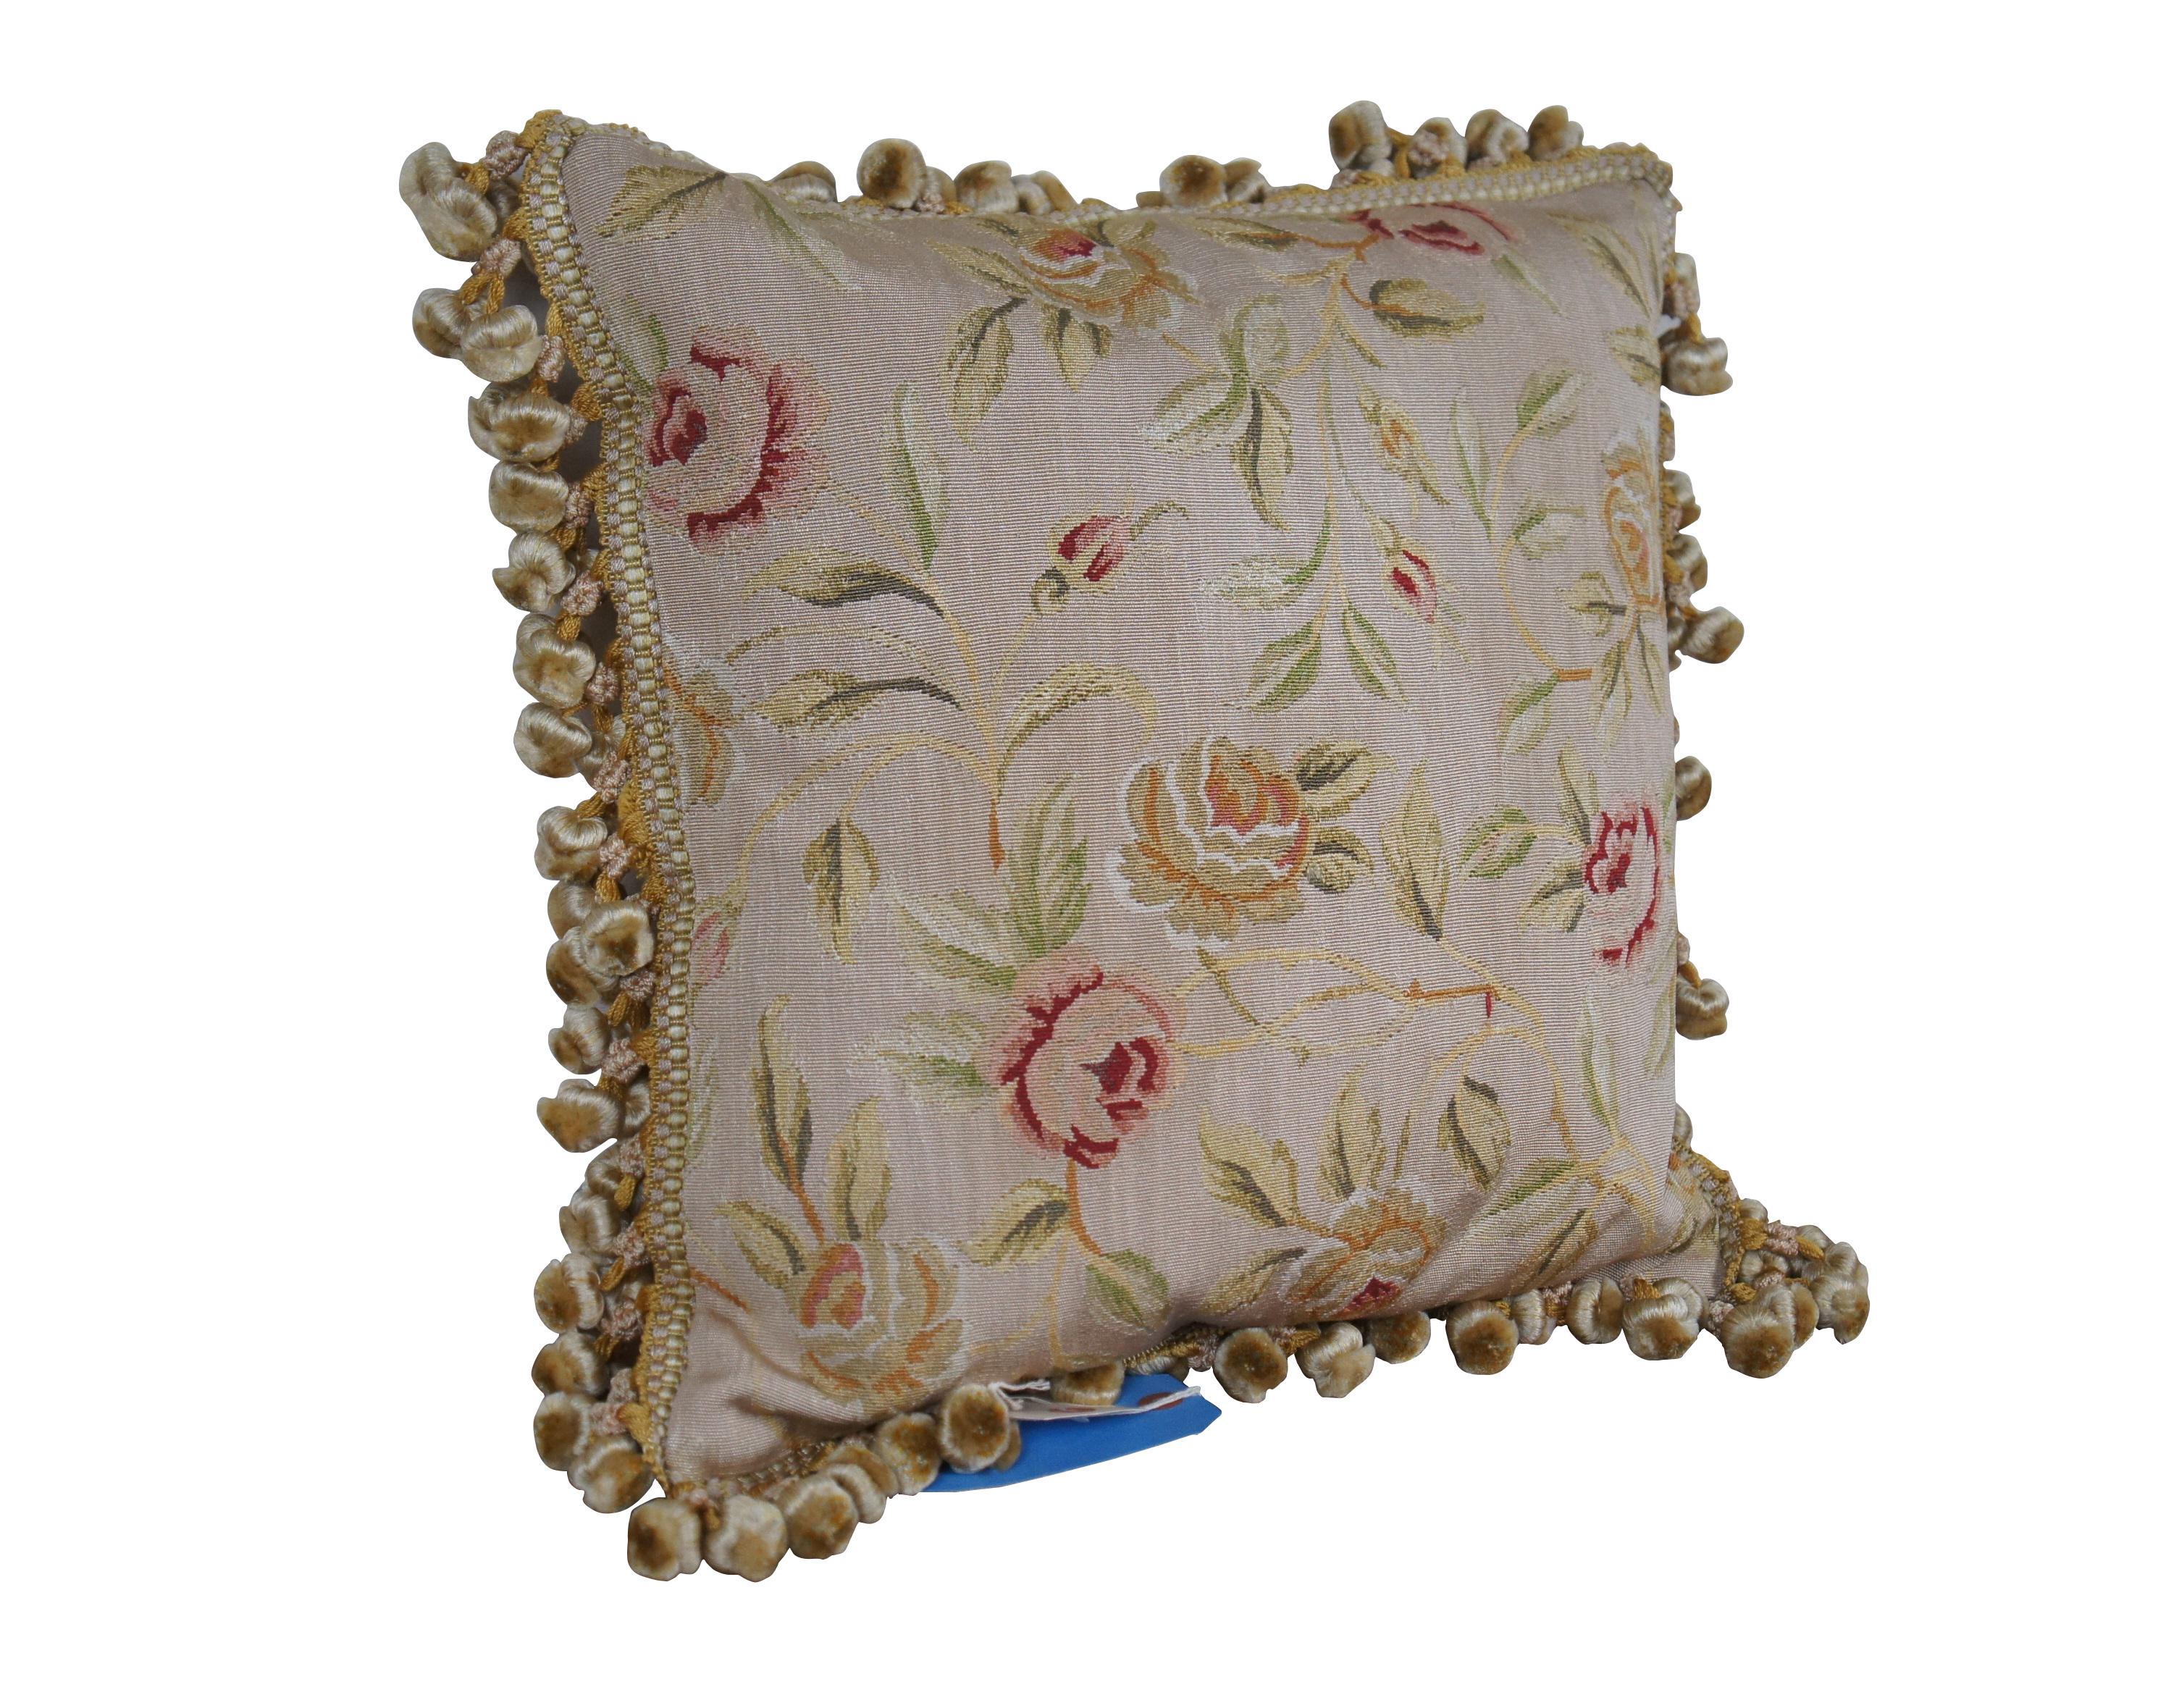 2 Available - 20th century square throw pillow, embroidered in silk with leafy stems of large yellow and pink roses. Cream and gold ball tassel trim. Light brown velour back with zipper closure.

Dimensions:
18